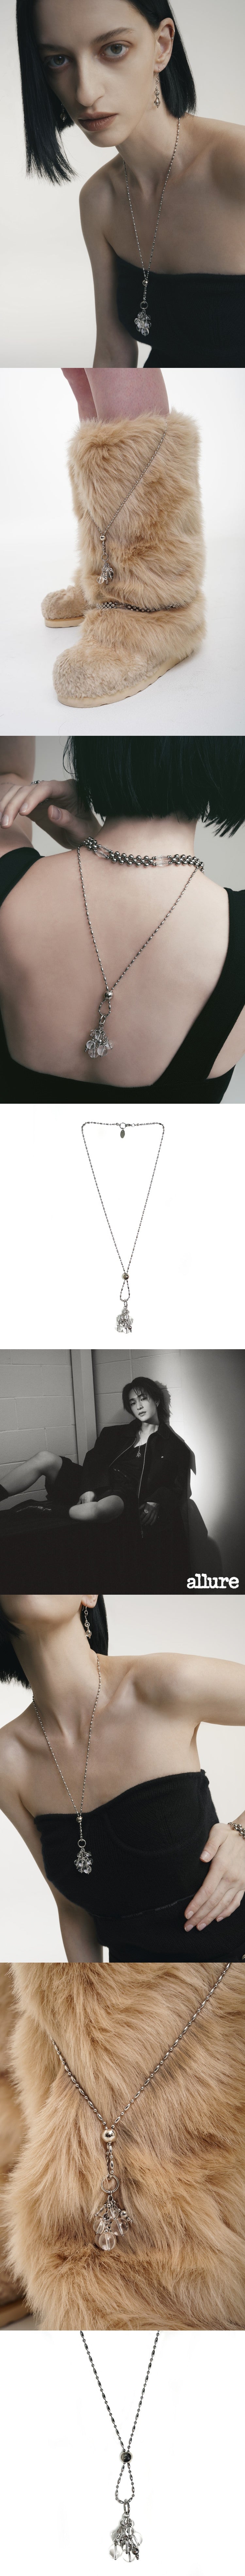 NECKLACE #29 (Shinee Onew weared it)